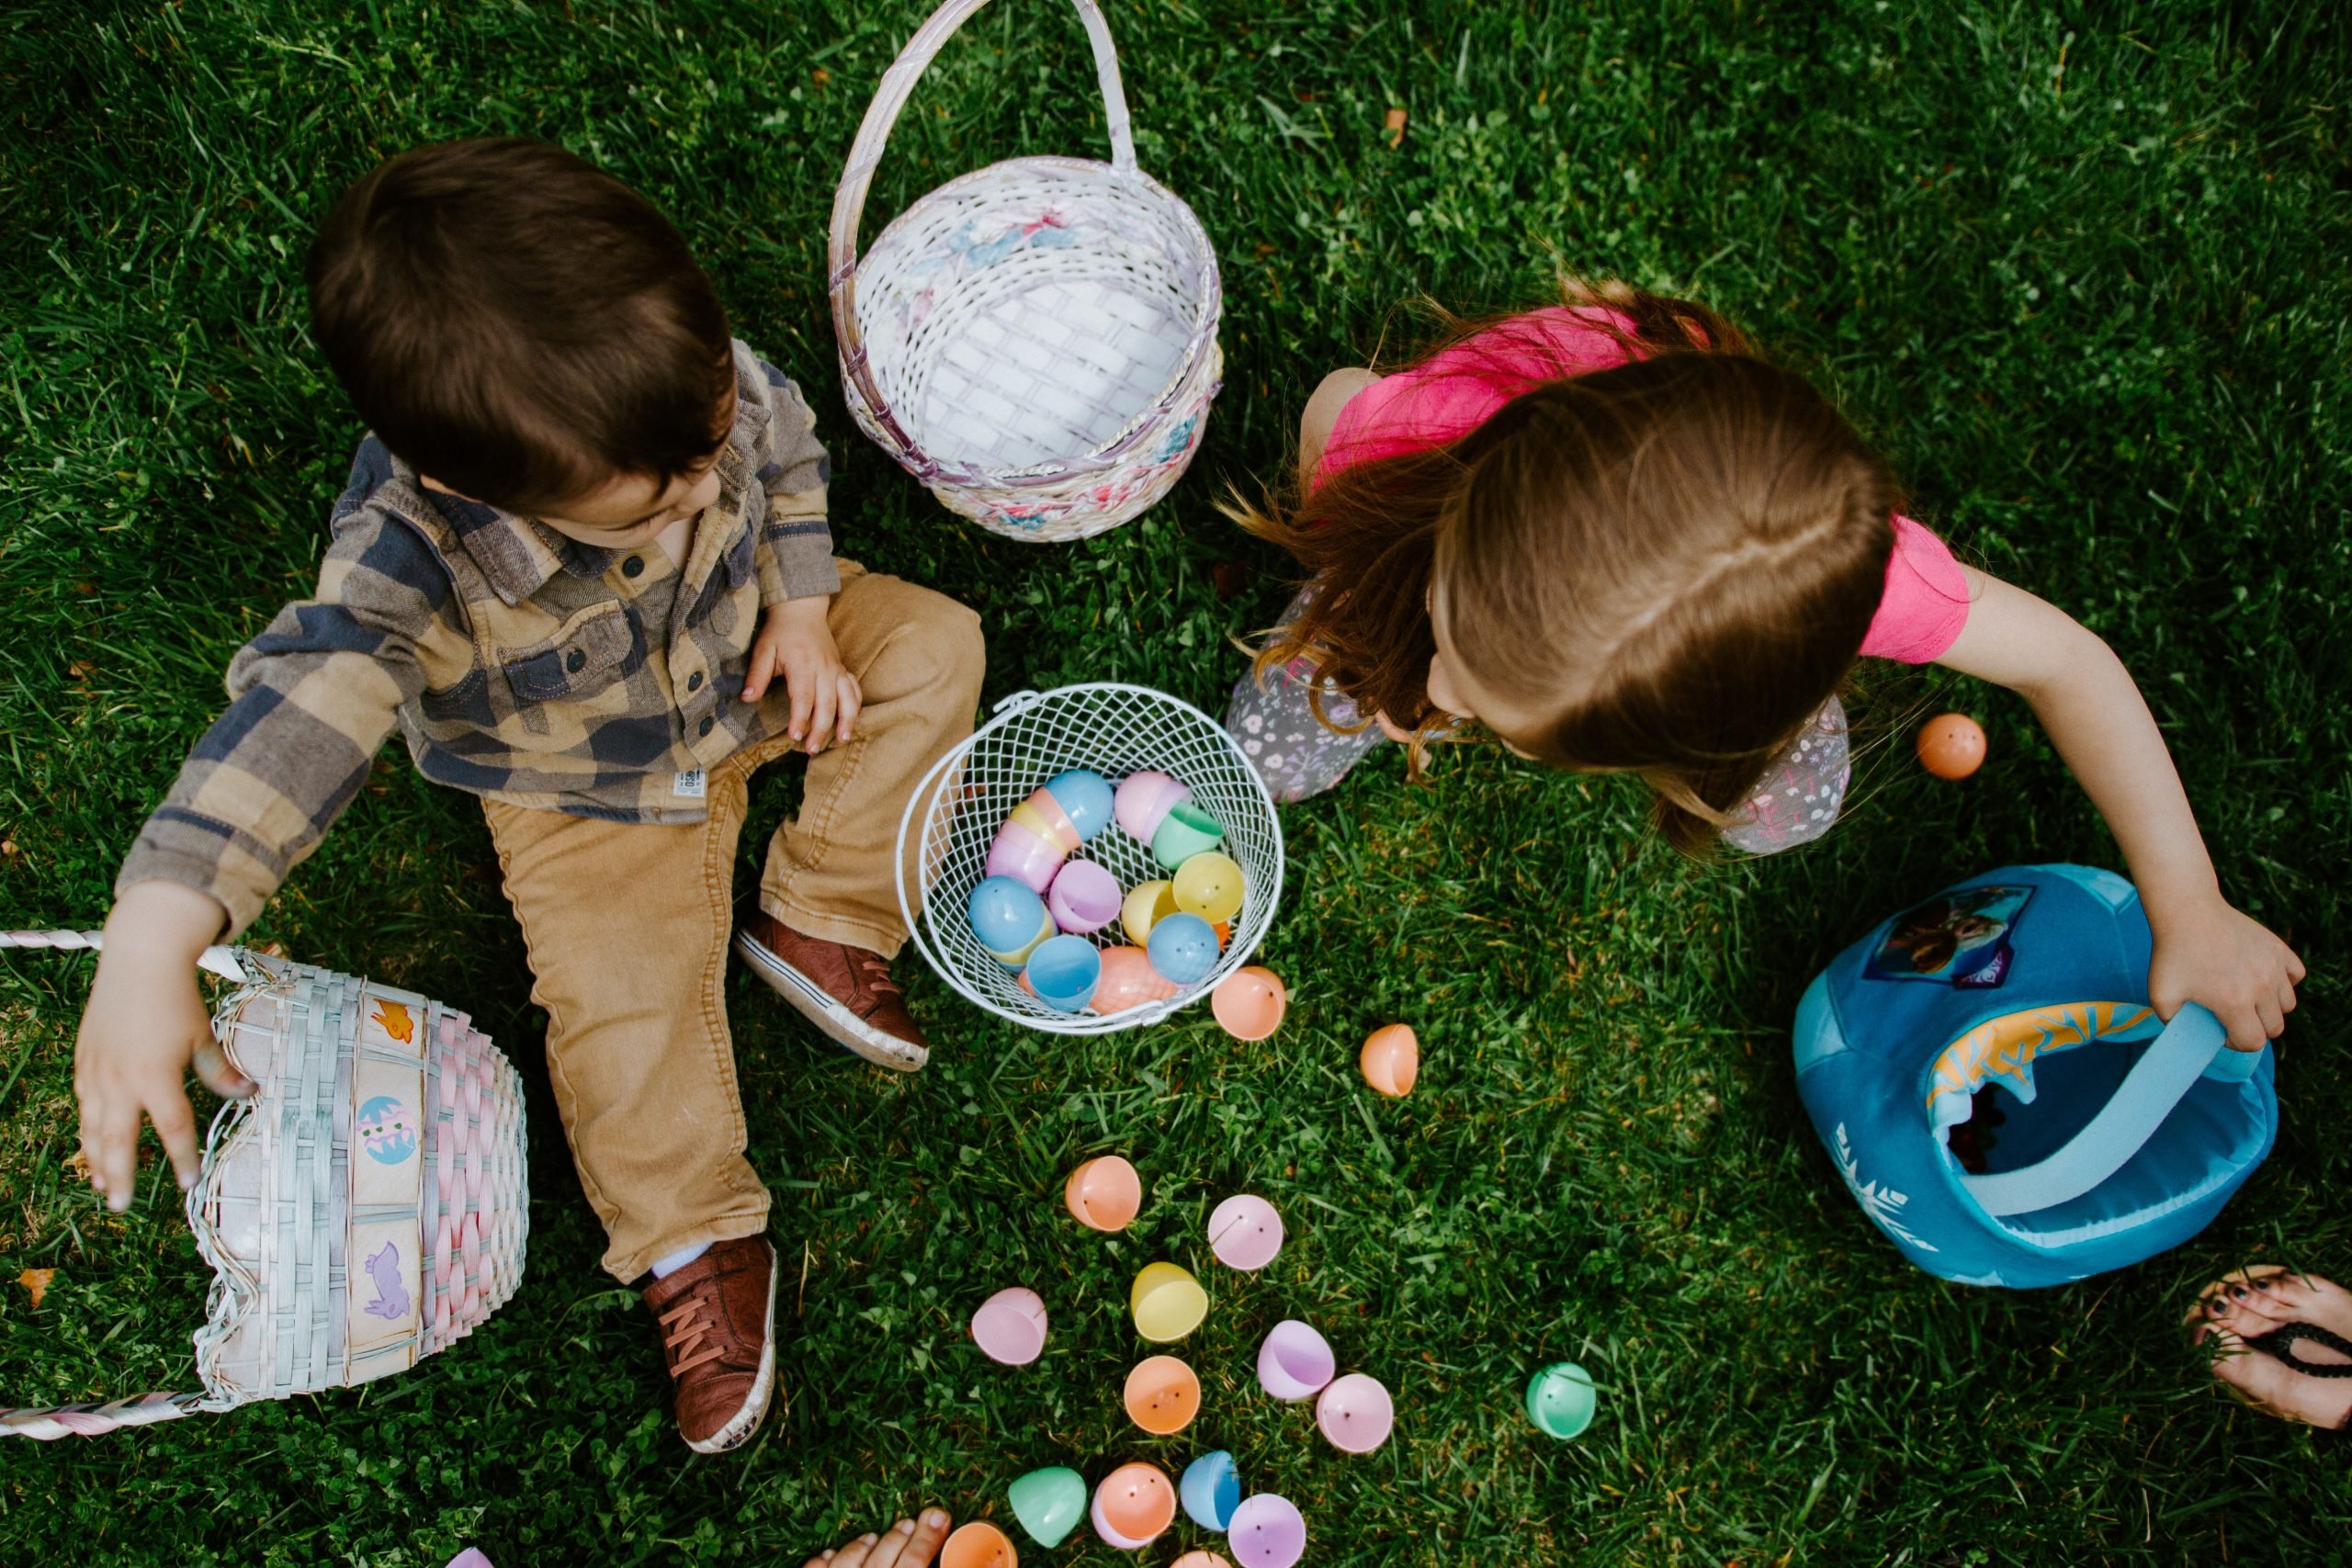 Kids sit in the grass with Easter items